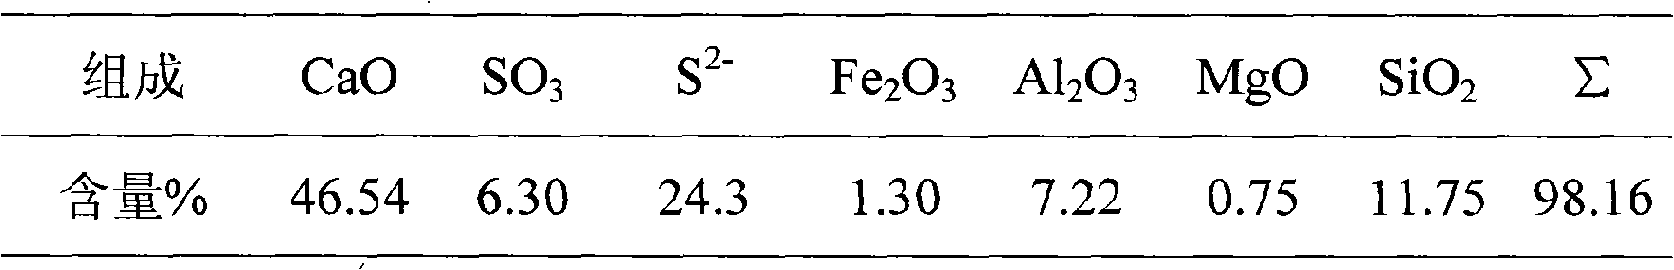 Method for producing light calcium carbonate and coproducing hydrogen sulfide by using crude calcium sulfide